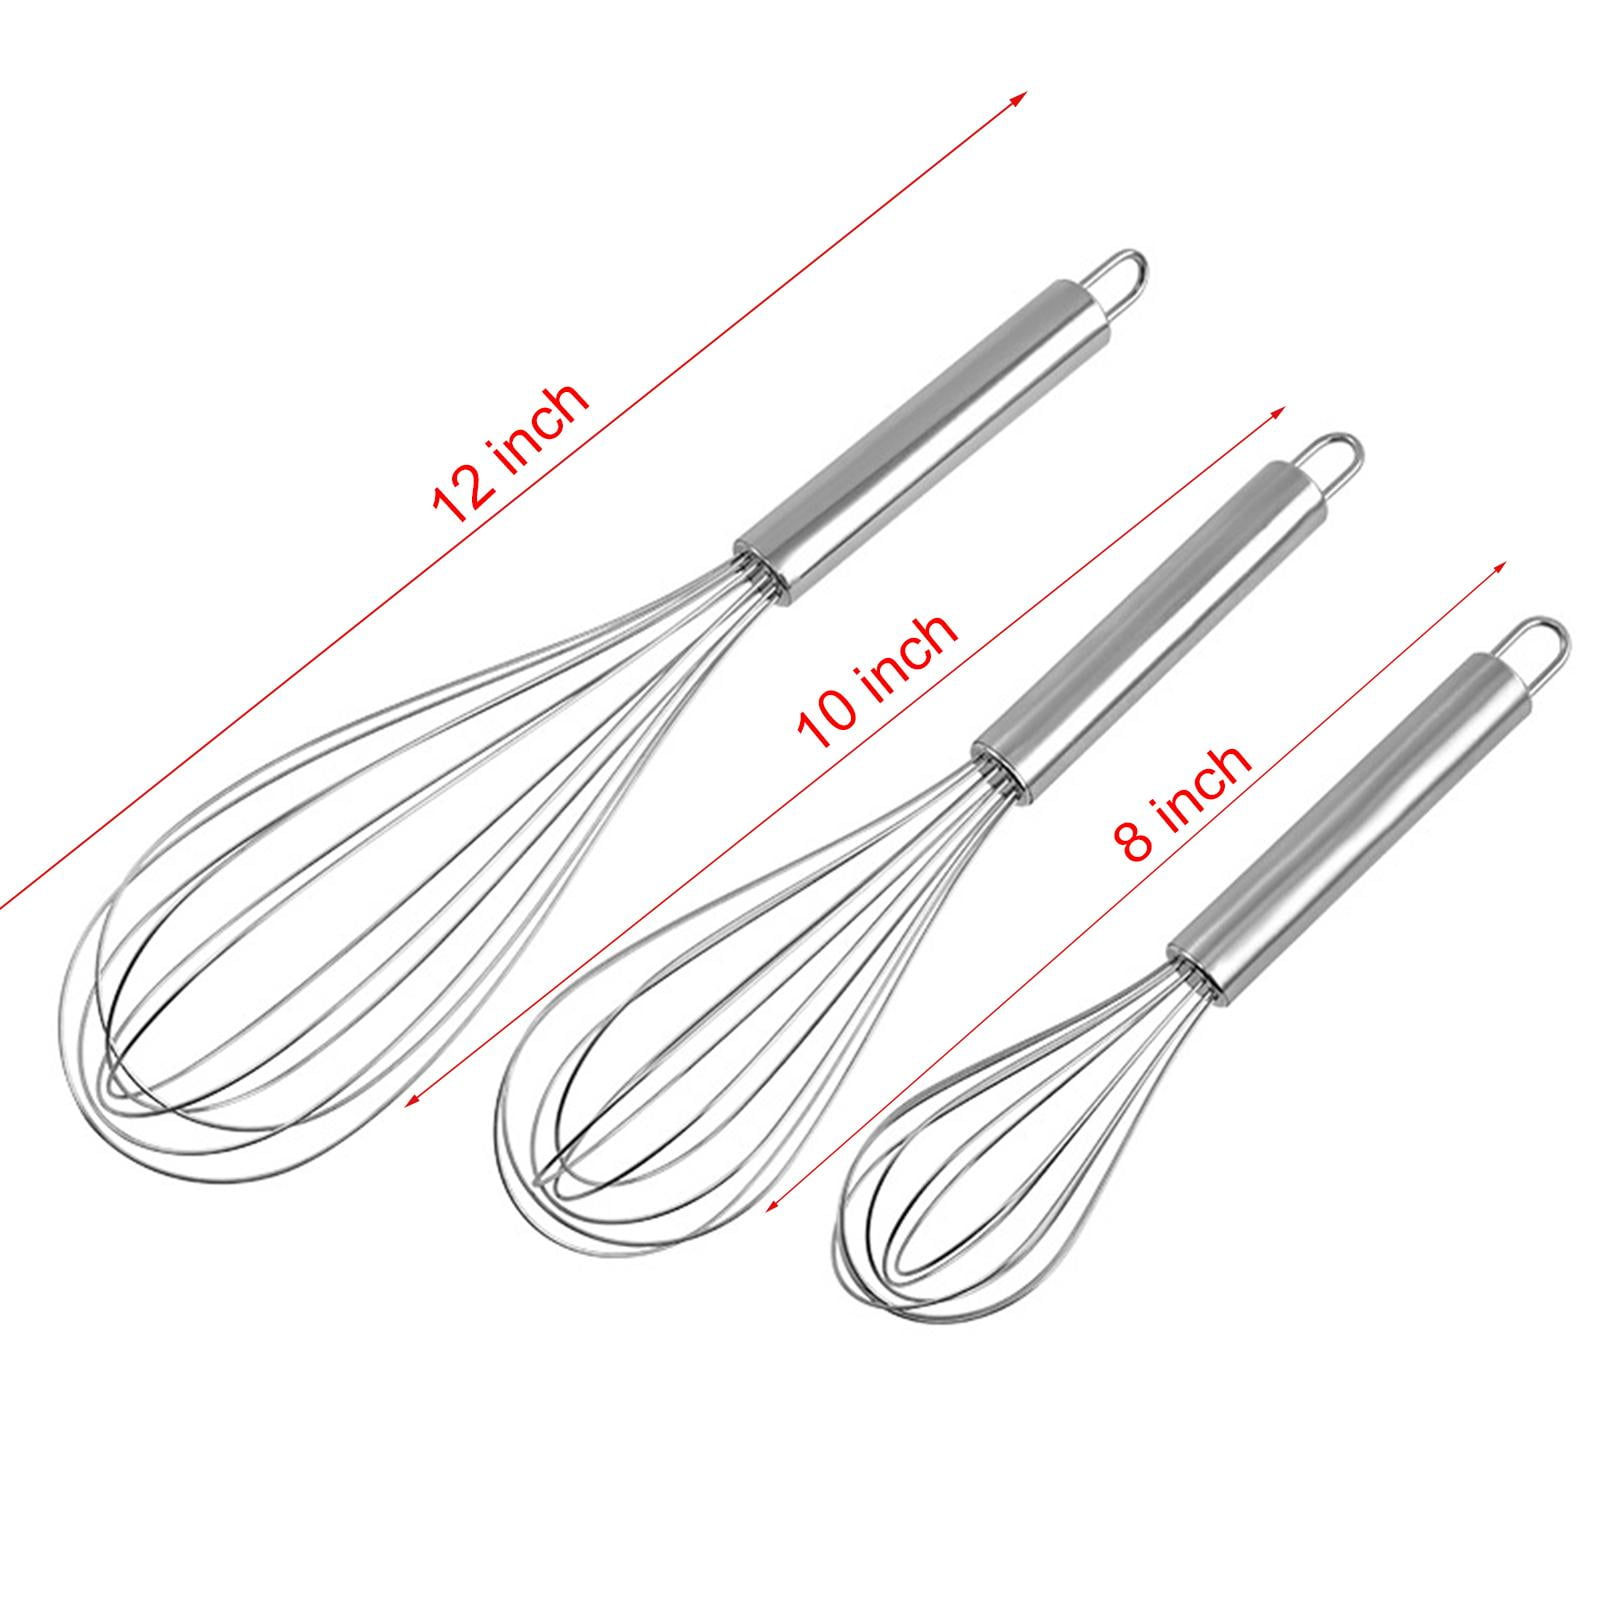 4 Mini Wire Kitchen Whisks Set Two 5 Inch + Two 7 Inch | Small Mixing tools